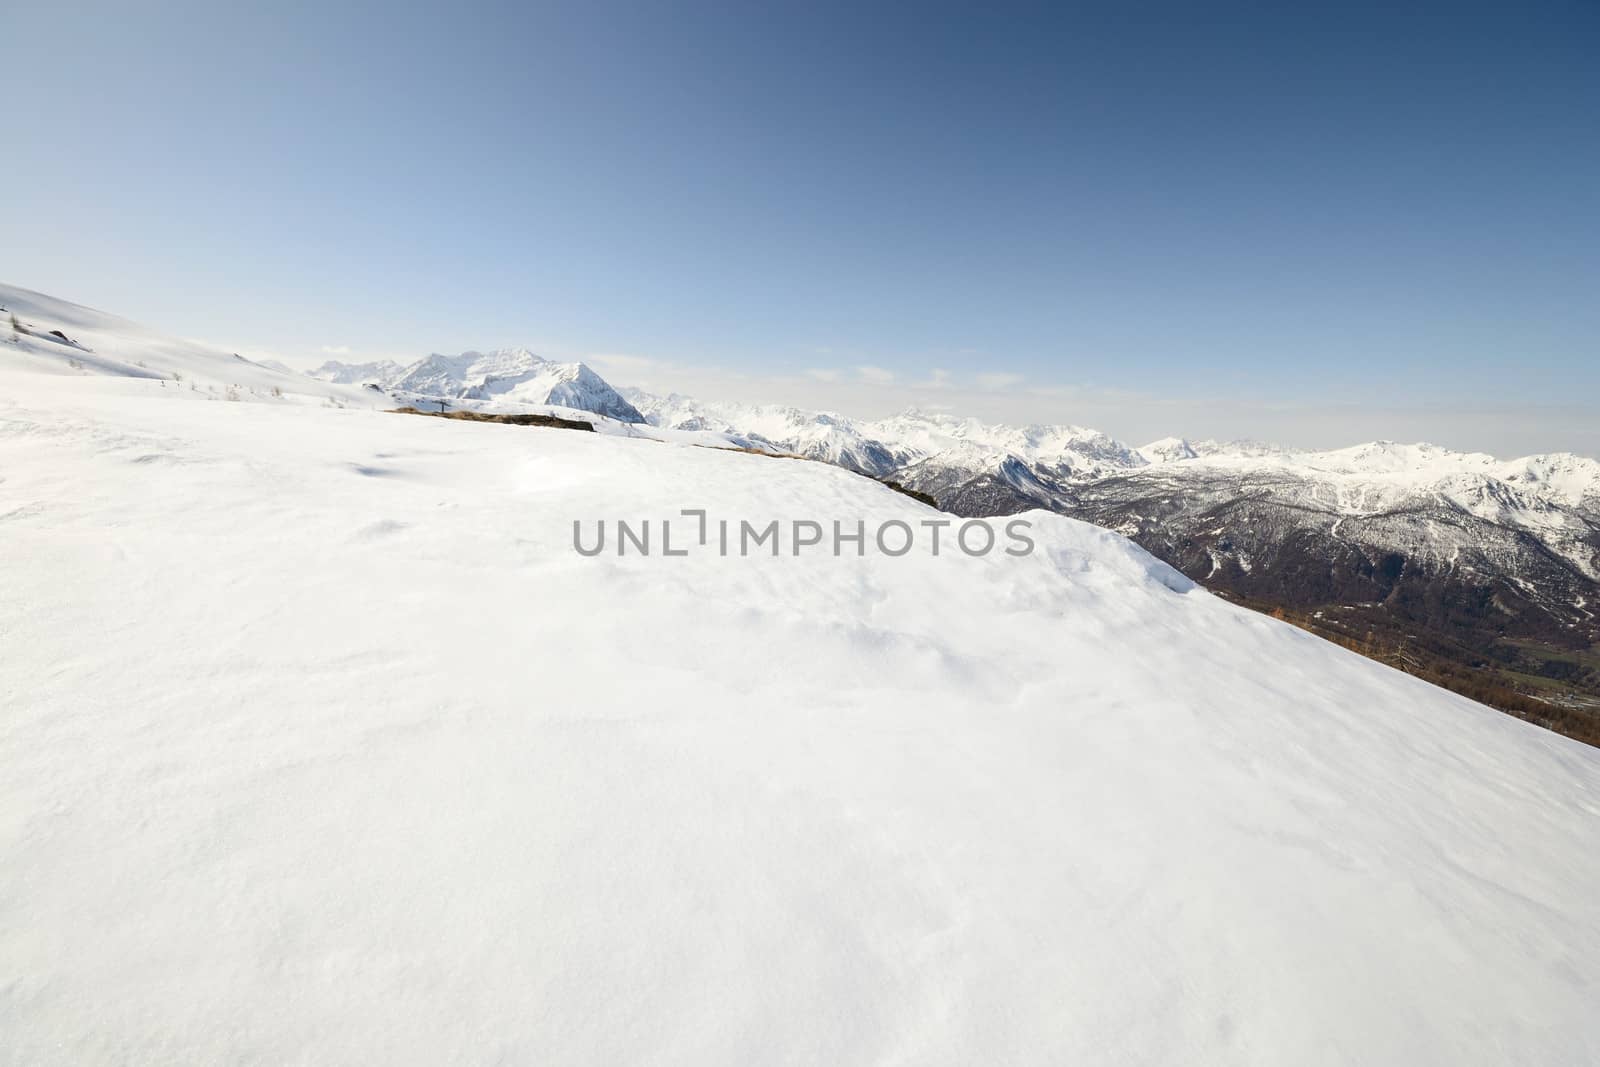 Ski resort and snowy slope in scenic background of high mountain peak